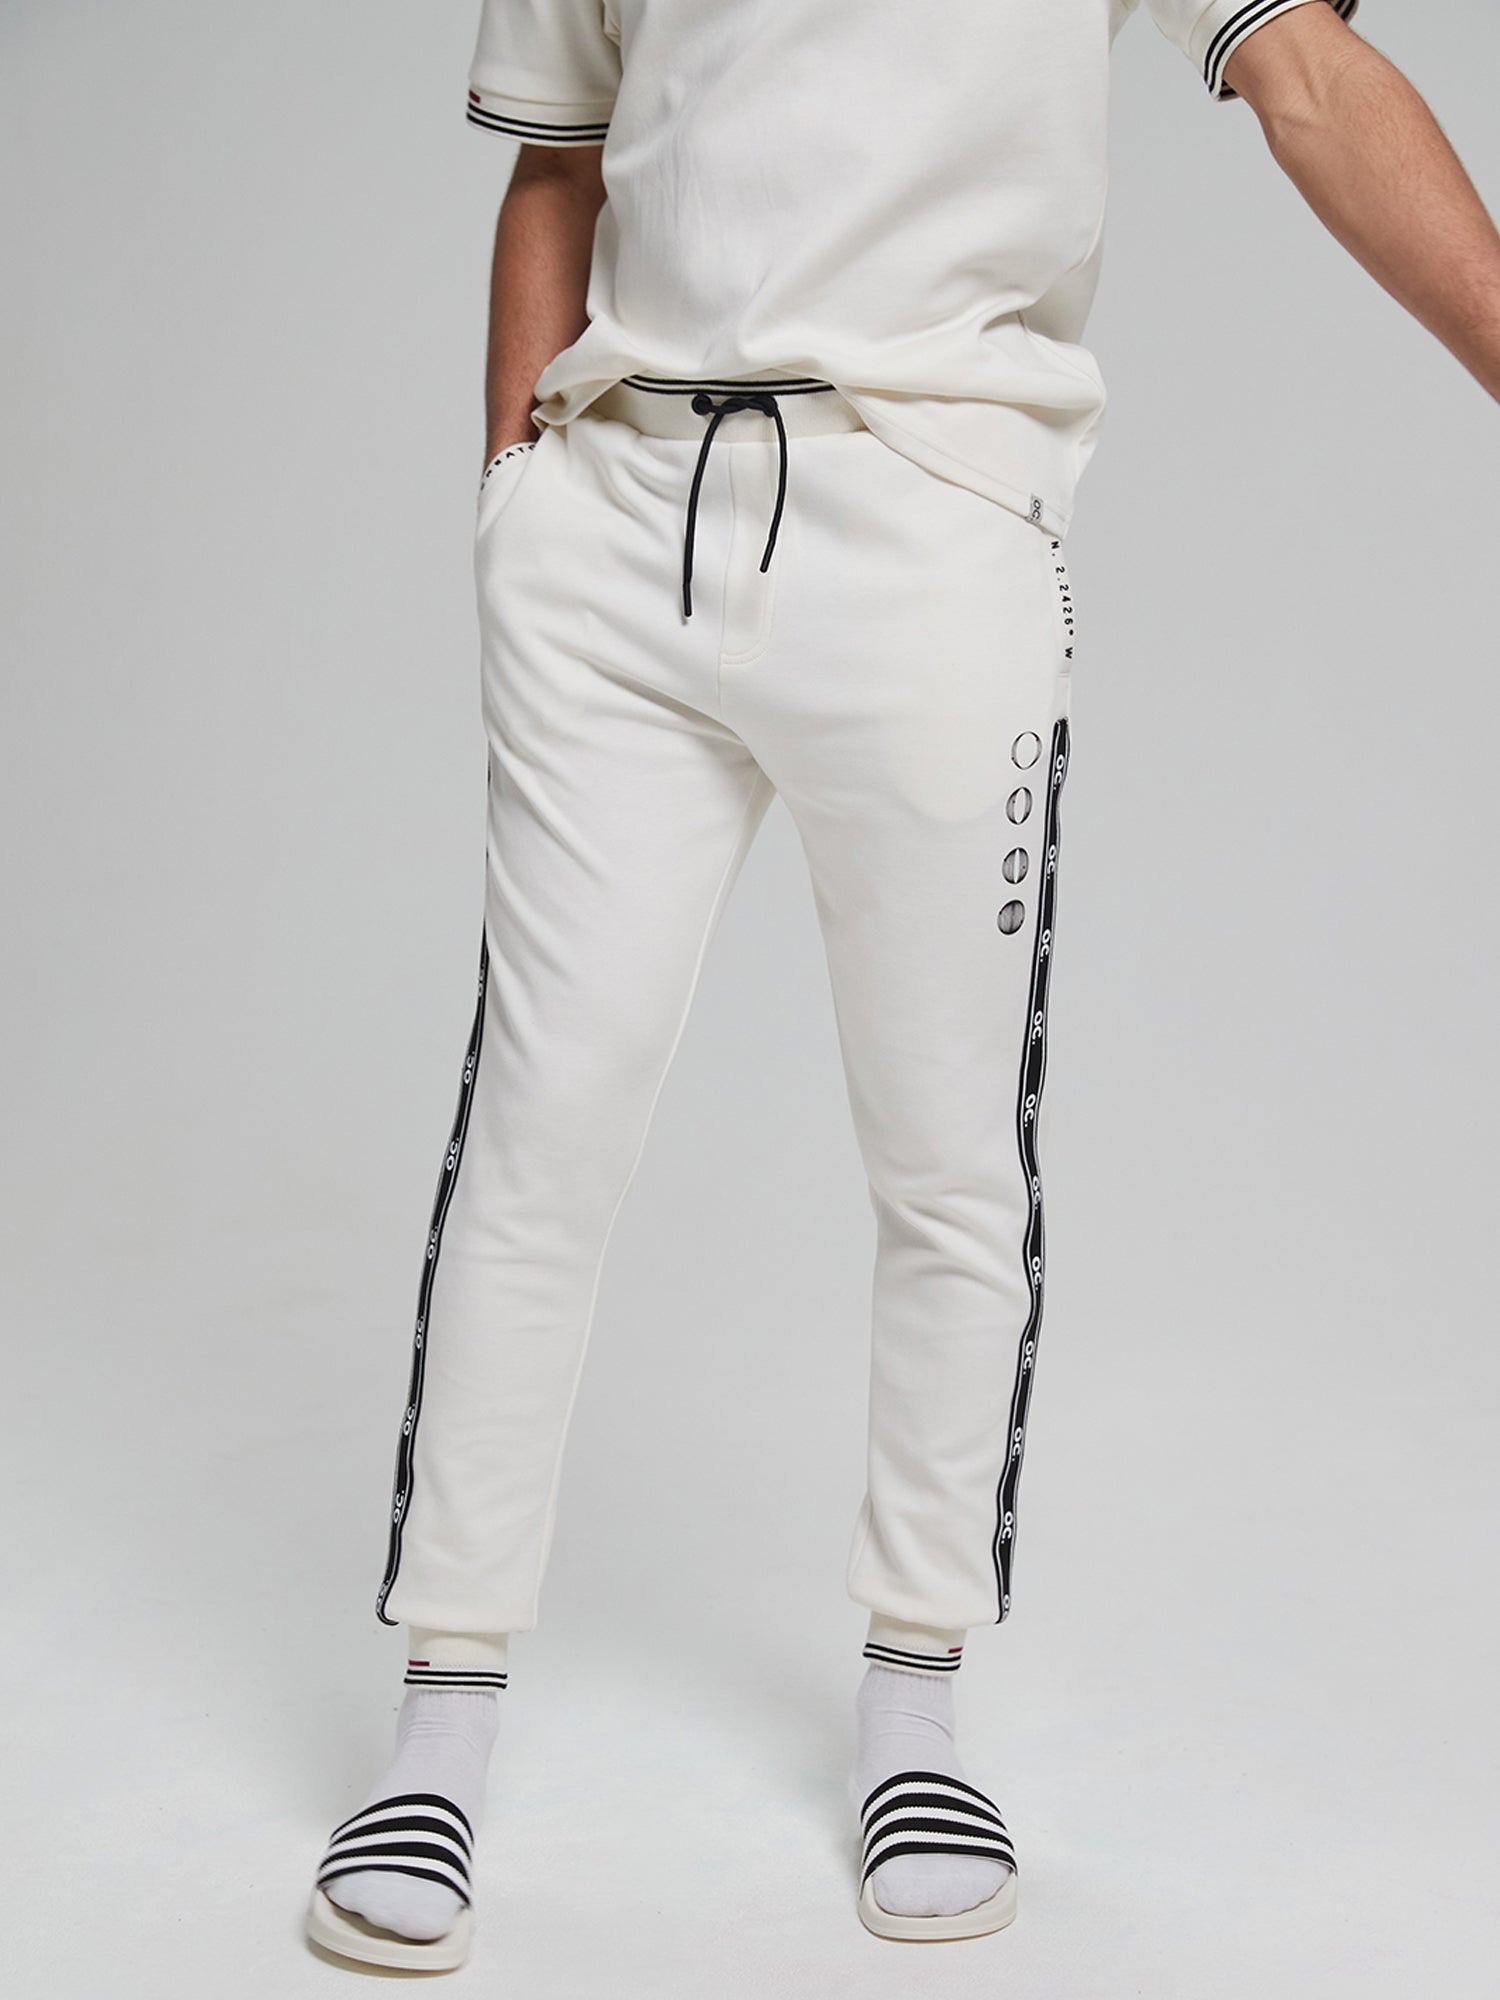 Hollister Joggers Canada Shopping